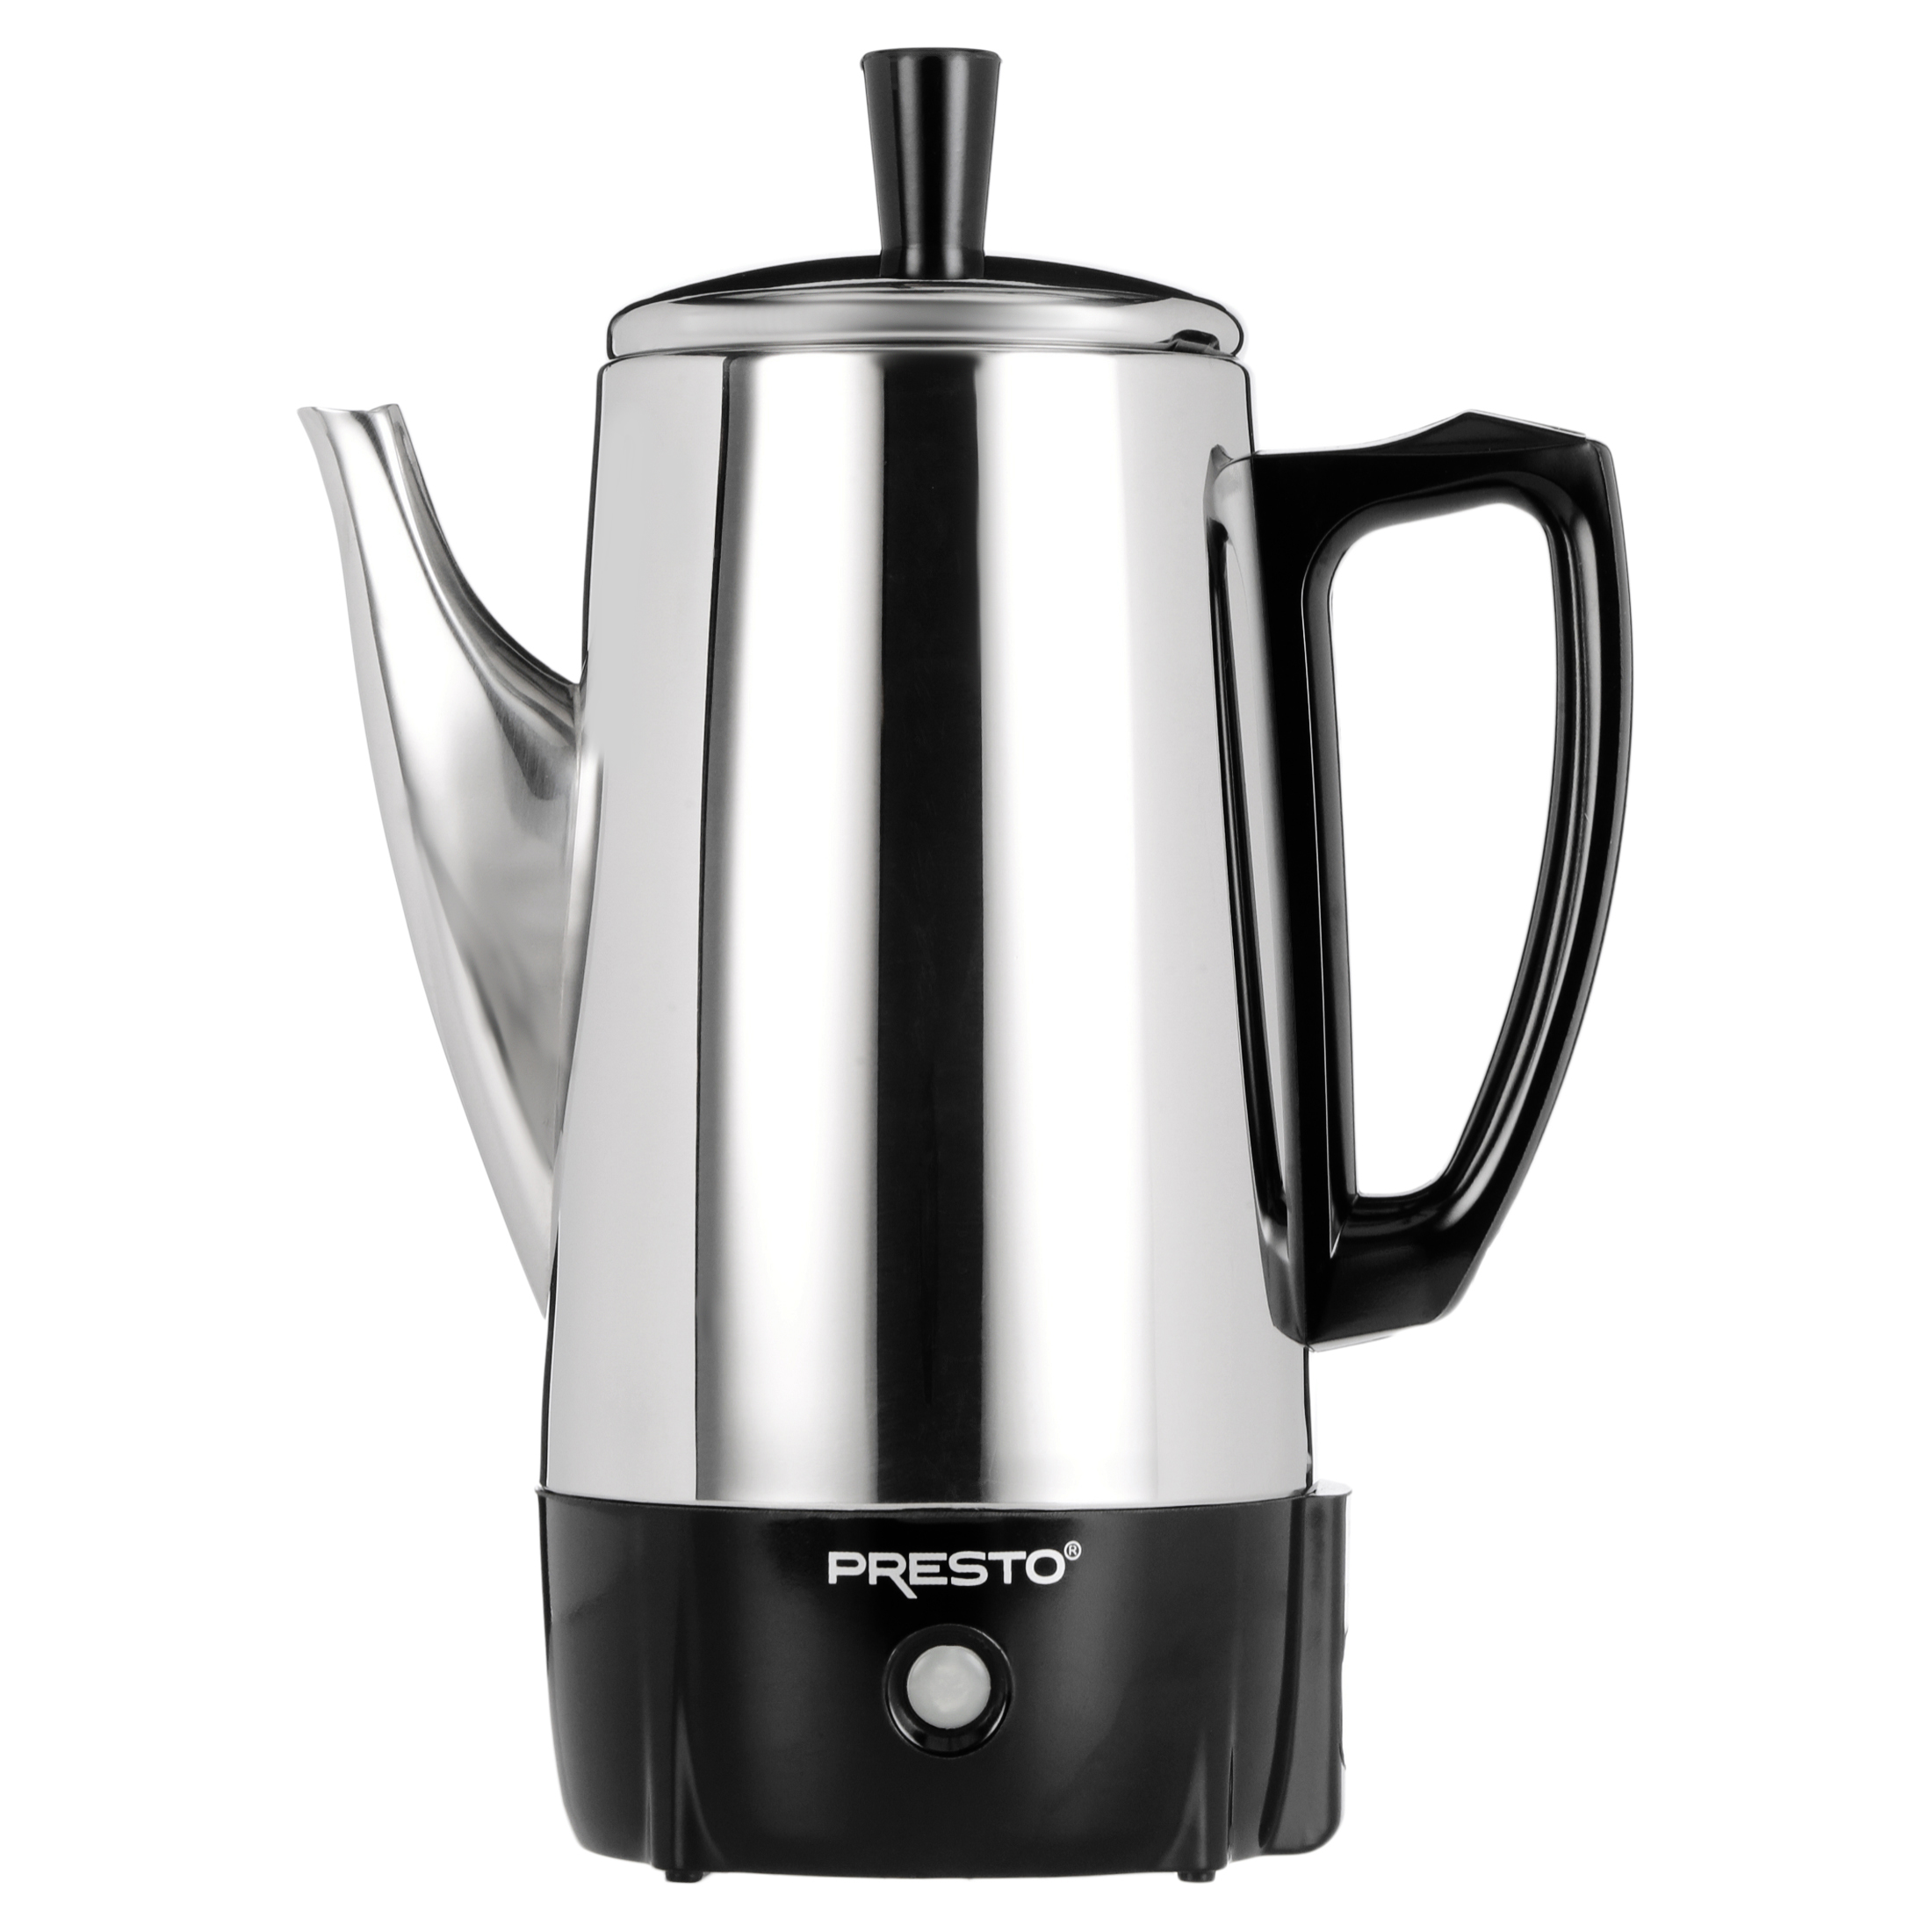 Presto® 6-Cup Capacity Stainless Steel Coffee Maker 02822 - image 6 of 10